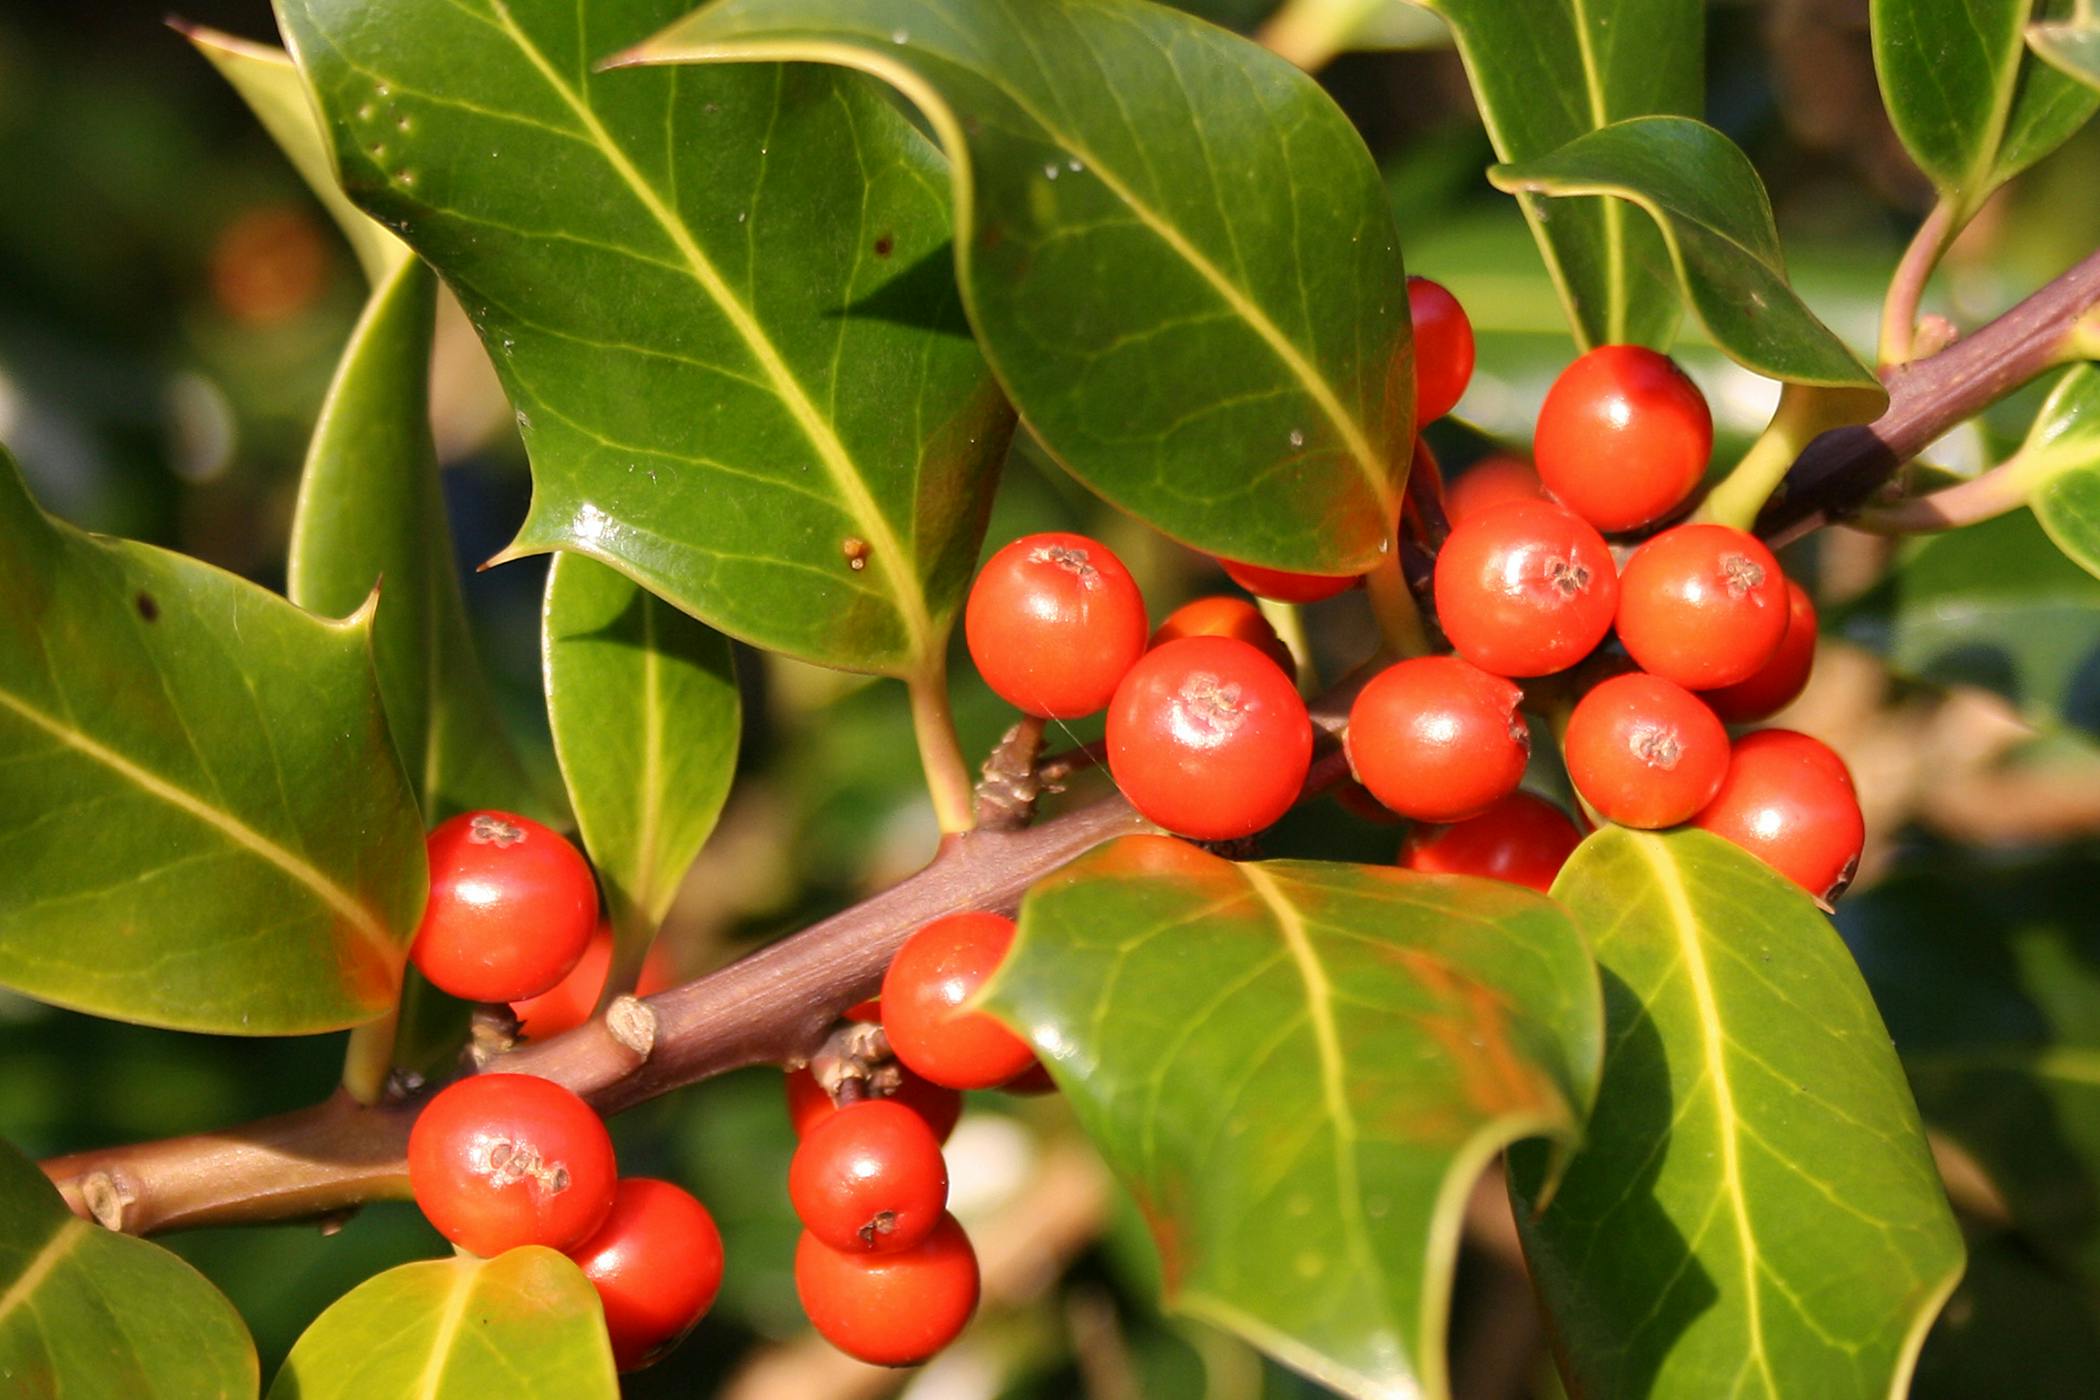 are holly plants poisonous to dogs